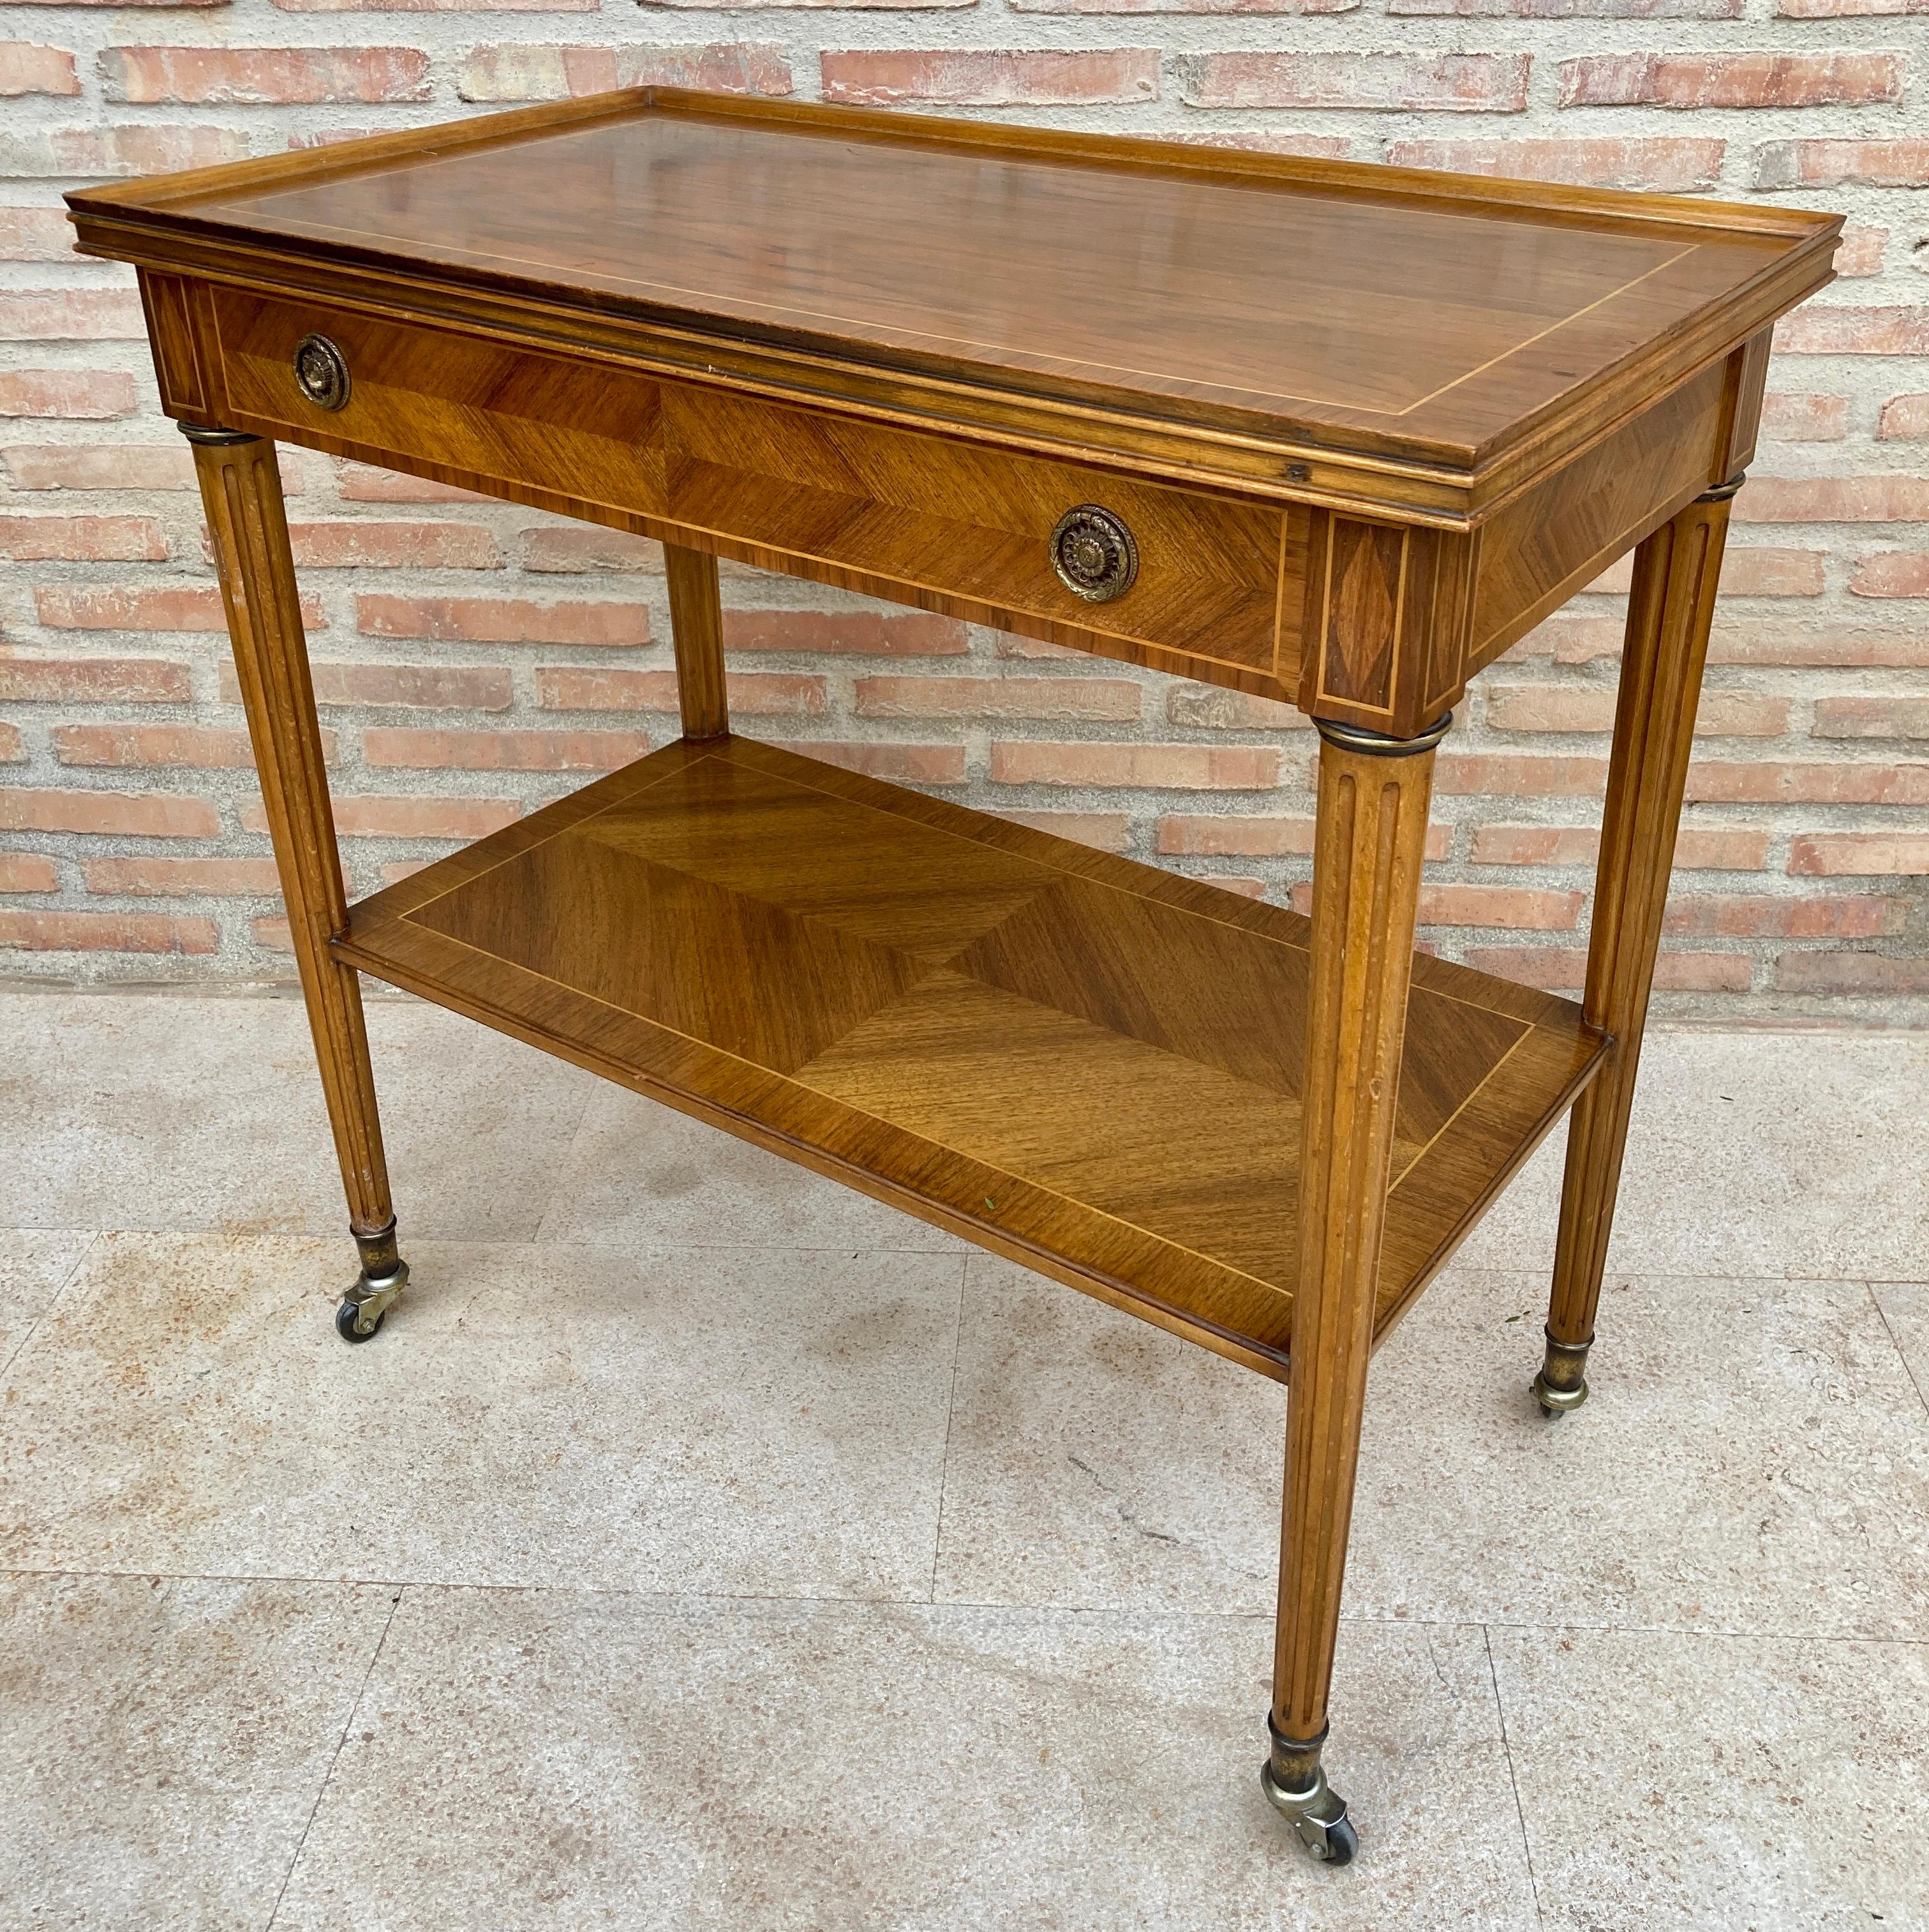 Walnut Neoclassic French Marquetry Side Table With One Drawer And Wheels 1940s For Sale